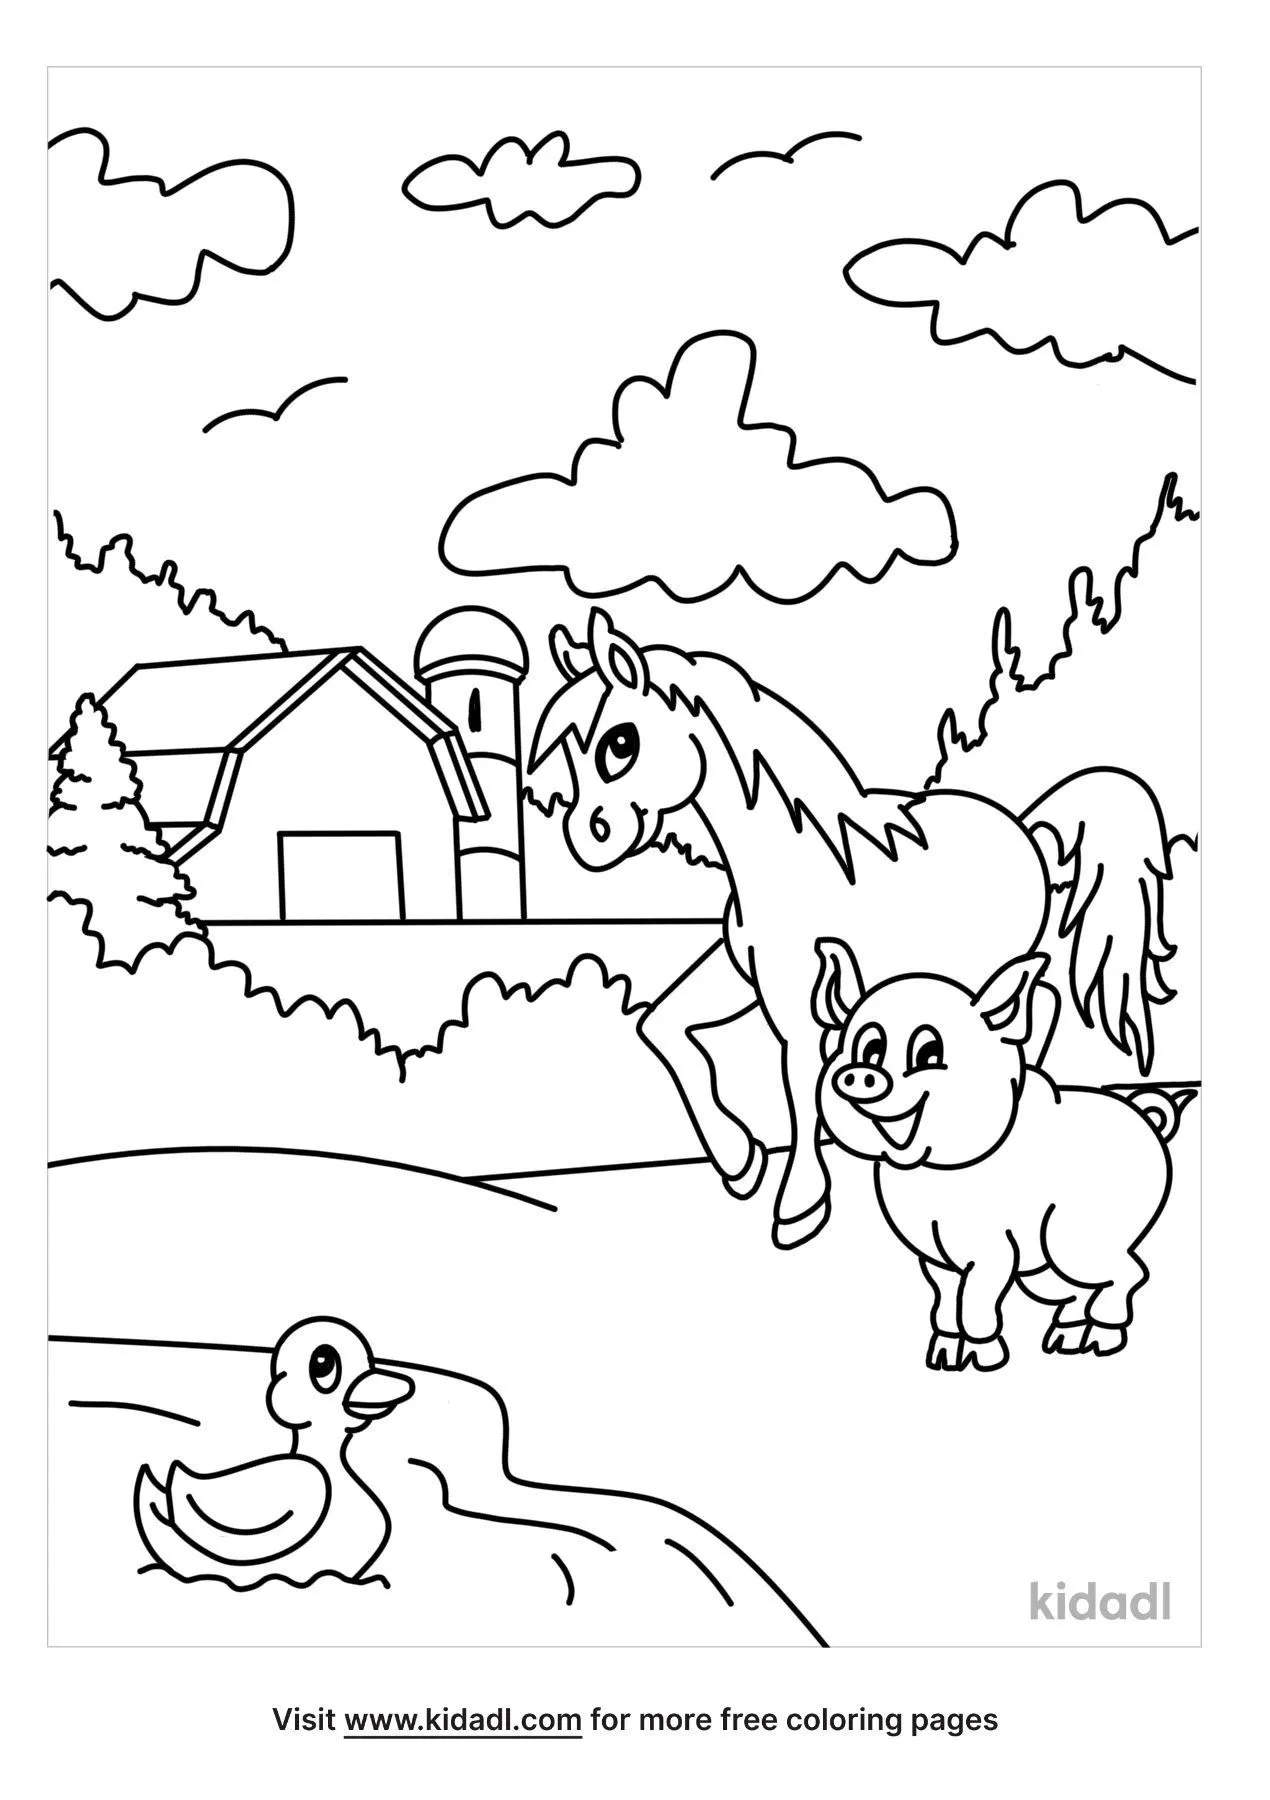 Farm Animal Coloring Pages   Free Farm Coloring Pages   Kidadl